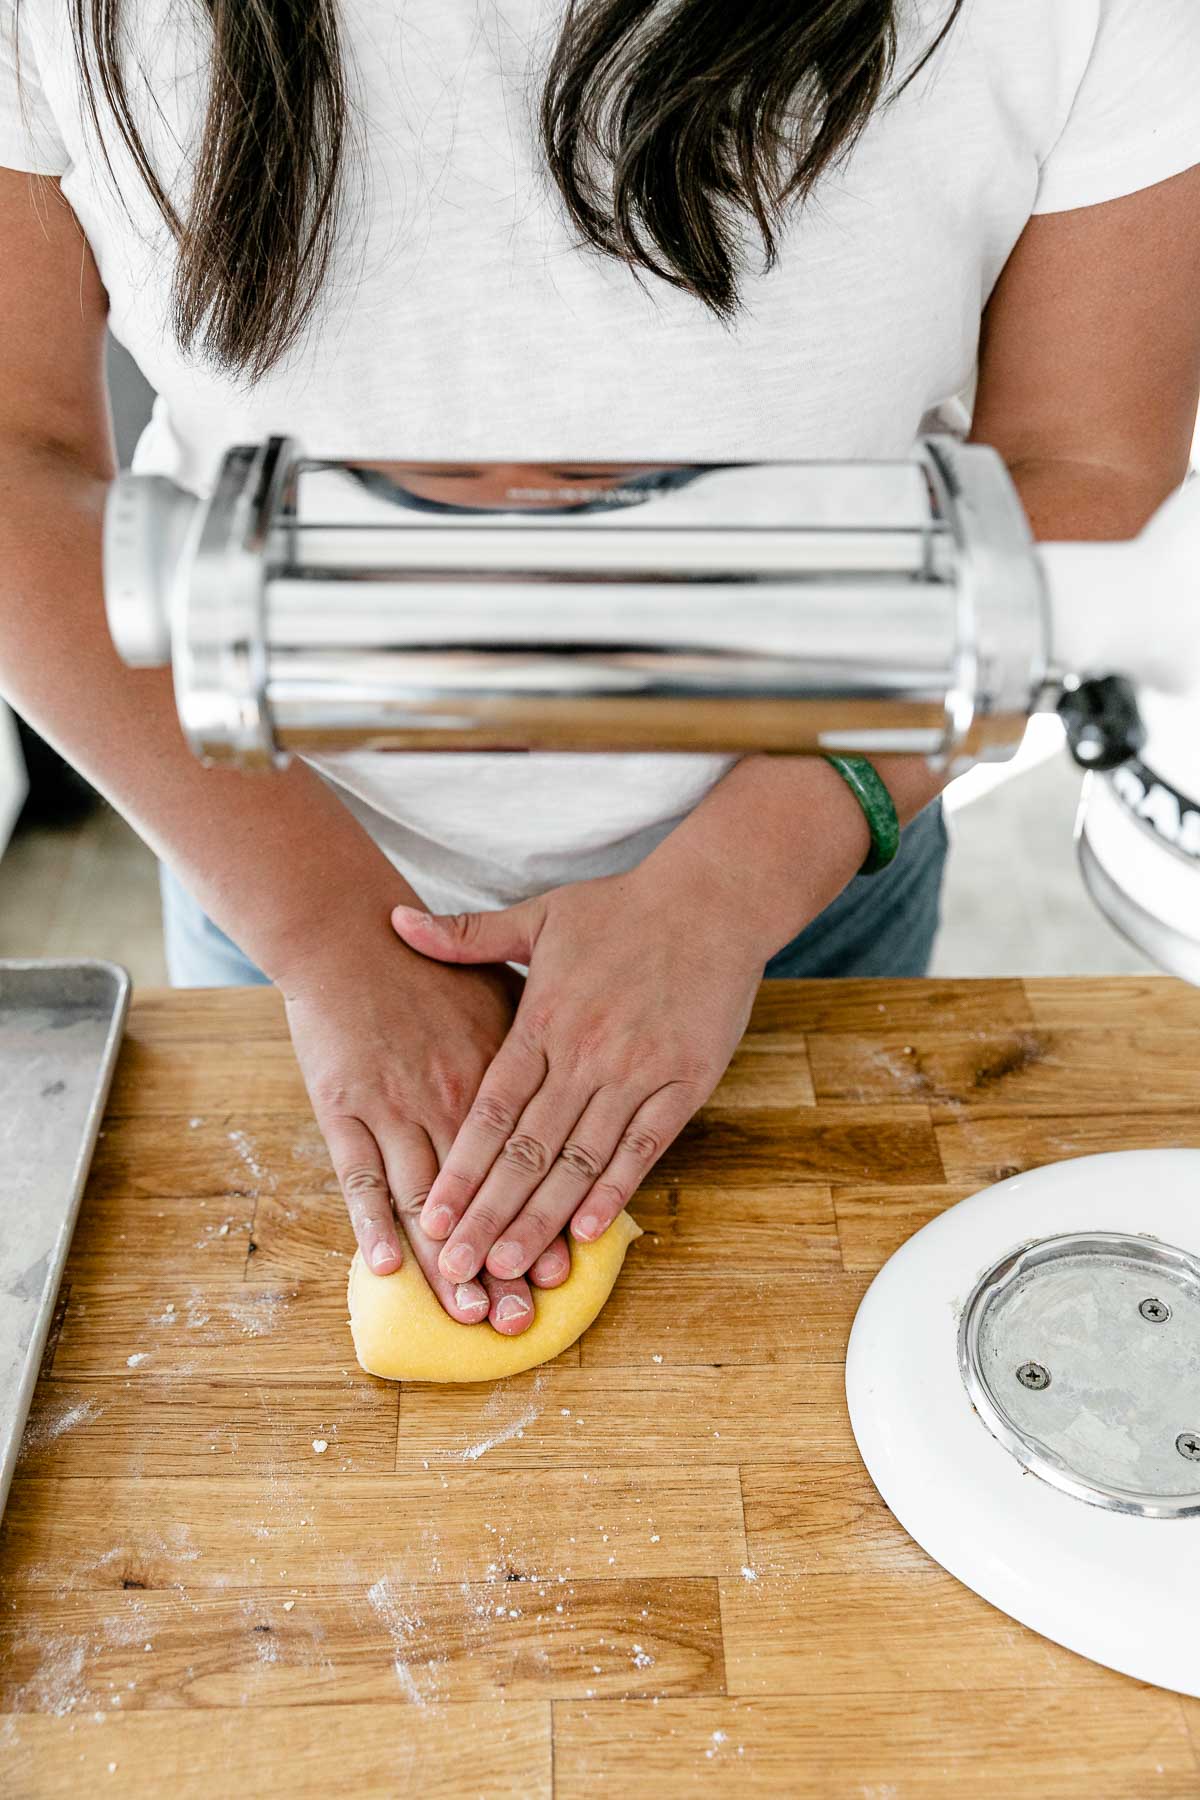 Jess of Plays Well With Butter uses her hands to press homemade pasta dough into a thin and even layer. The dough sits atop a butcher block countertop that has been lightly dusted with flour. A KitchenAid Stand Mixer with a pasta rolling attachment is set up to be used to roll out the pasta dough and an aluminum baking sheet also sits on top of the countertop.